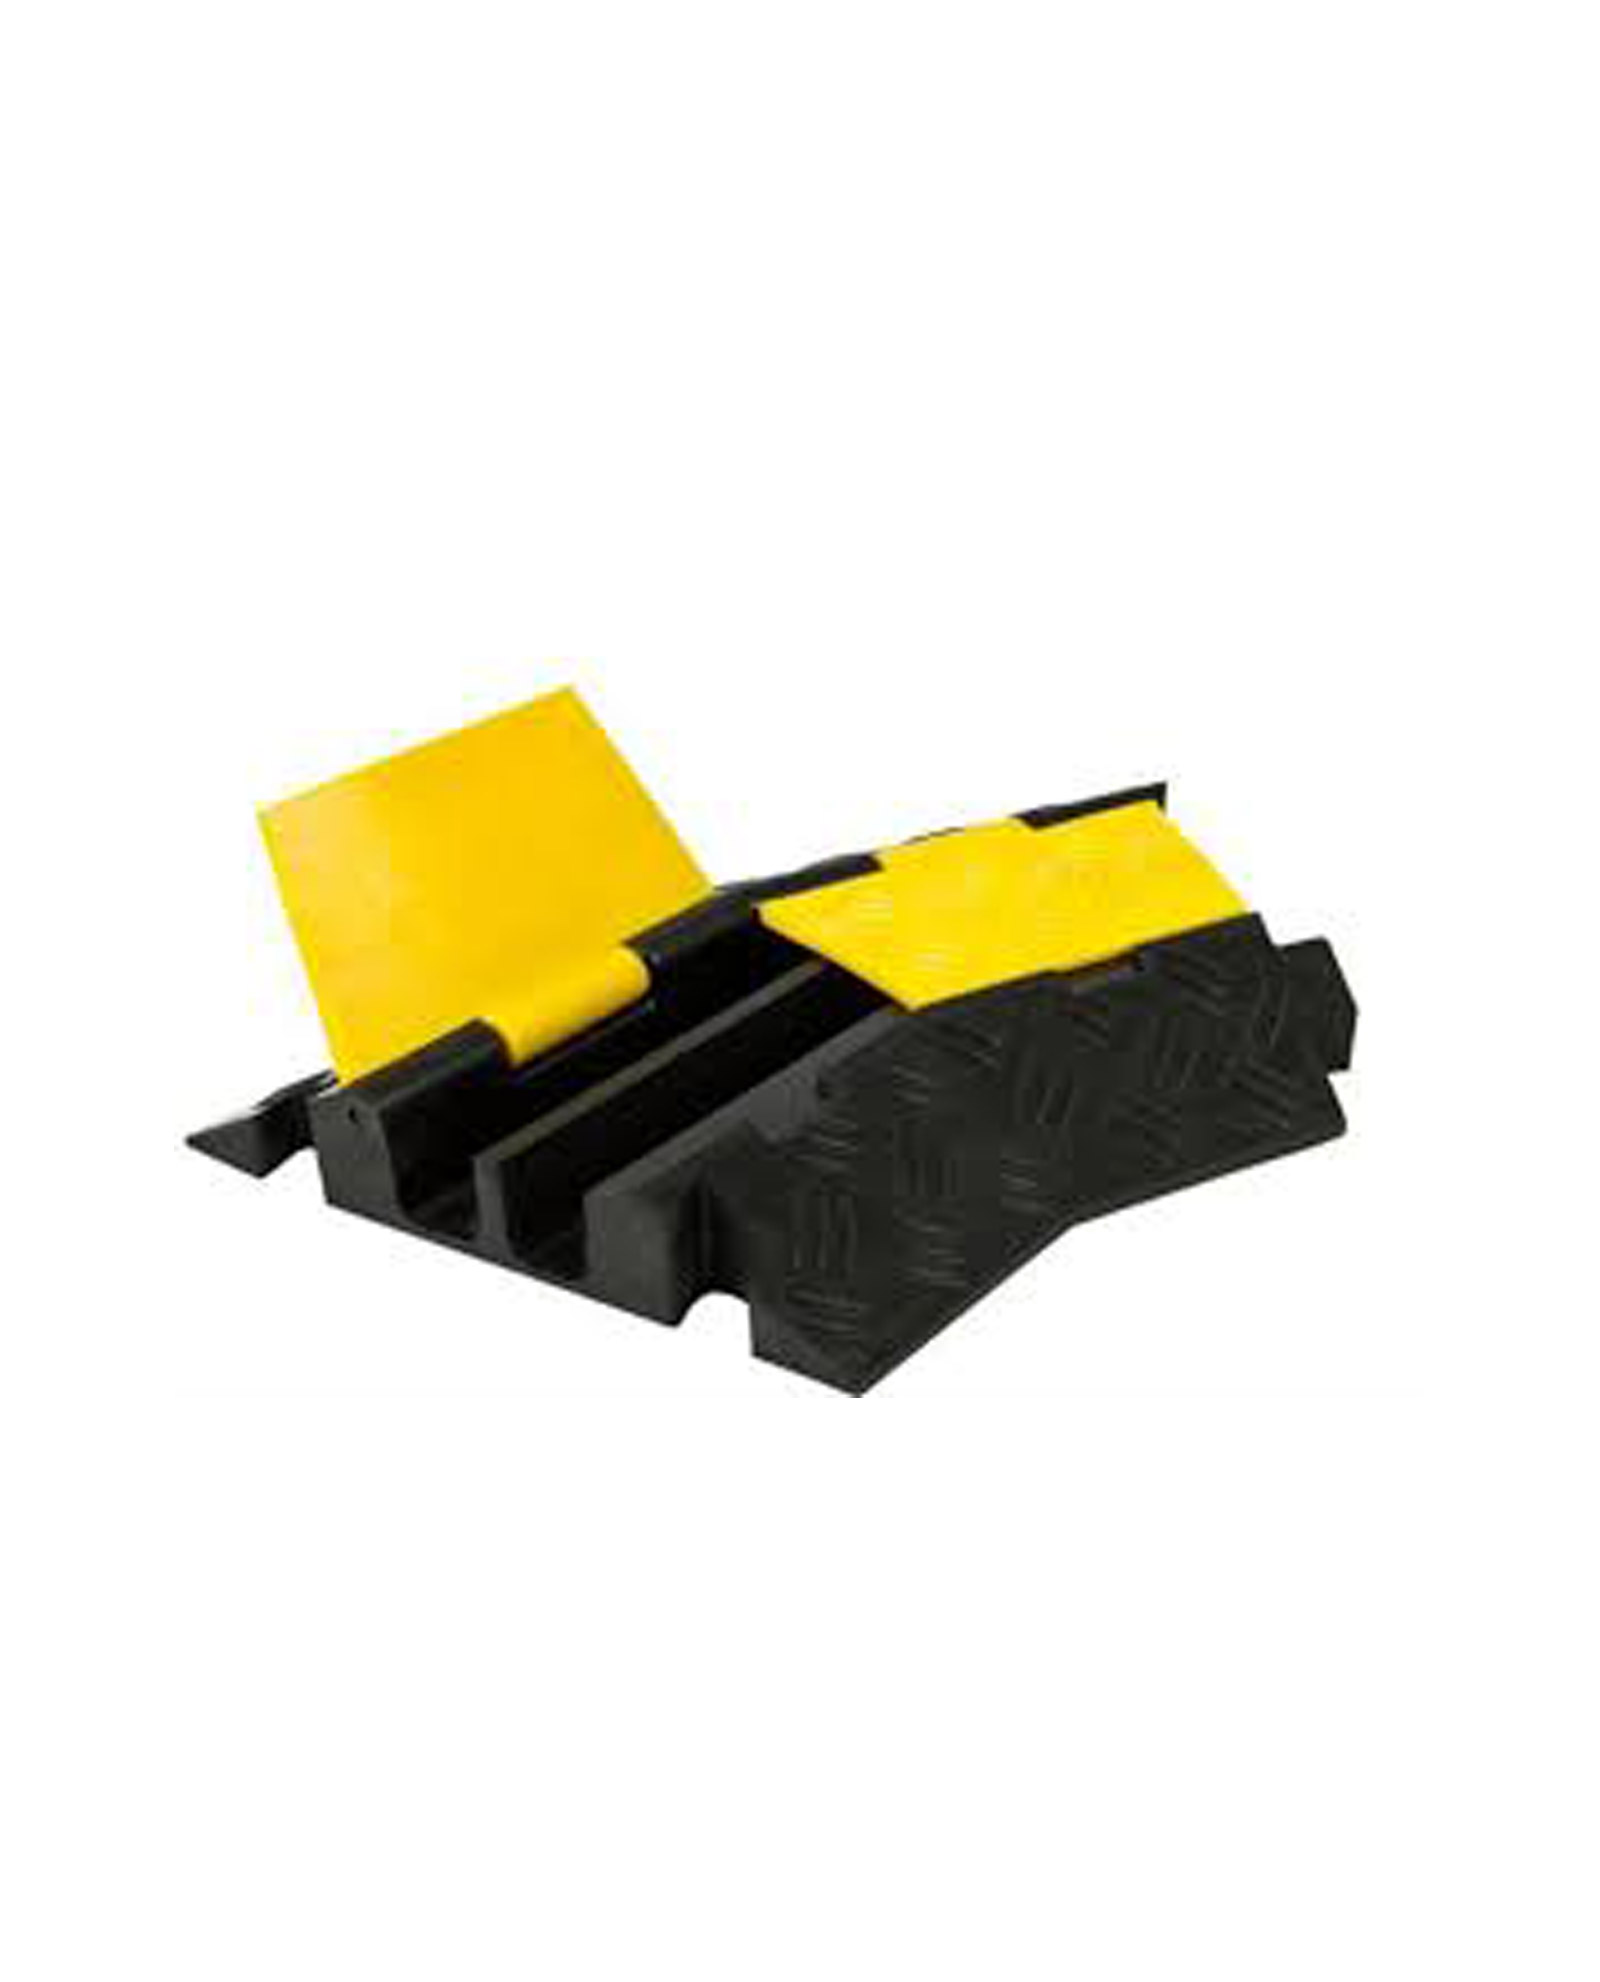 Tcp Cp 2c Cable Ramp Protector 2 Channel Corner 45 Degree